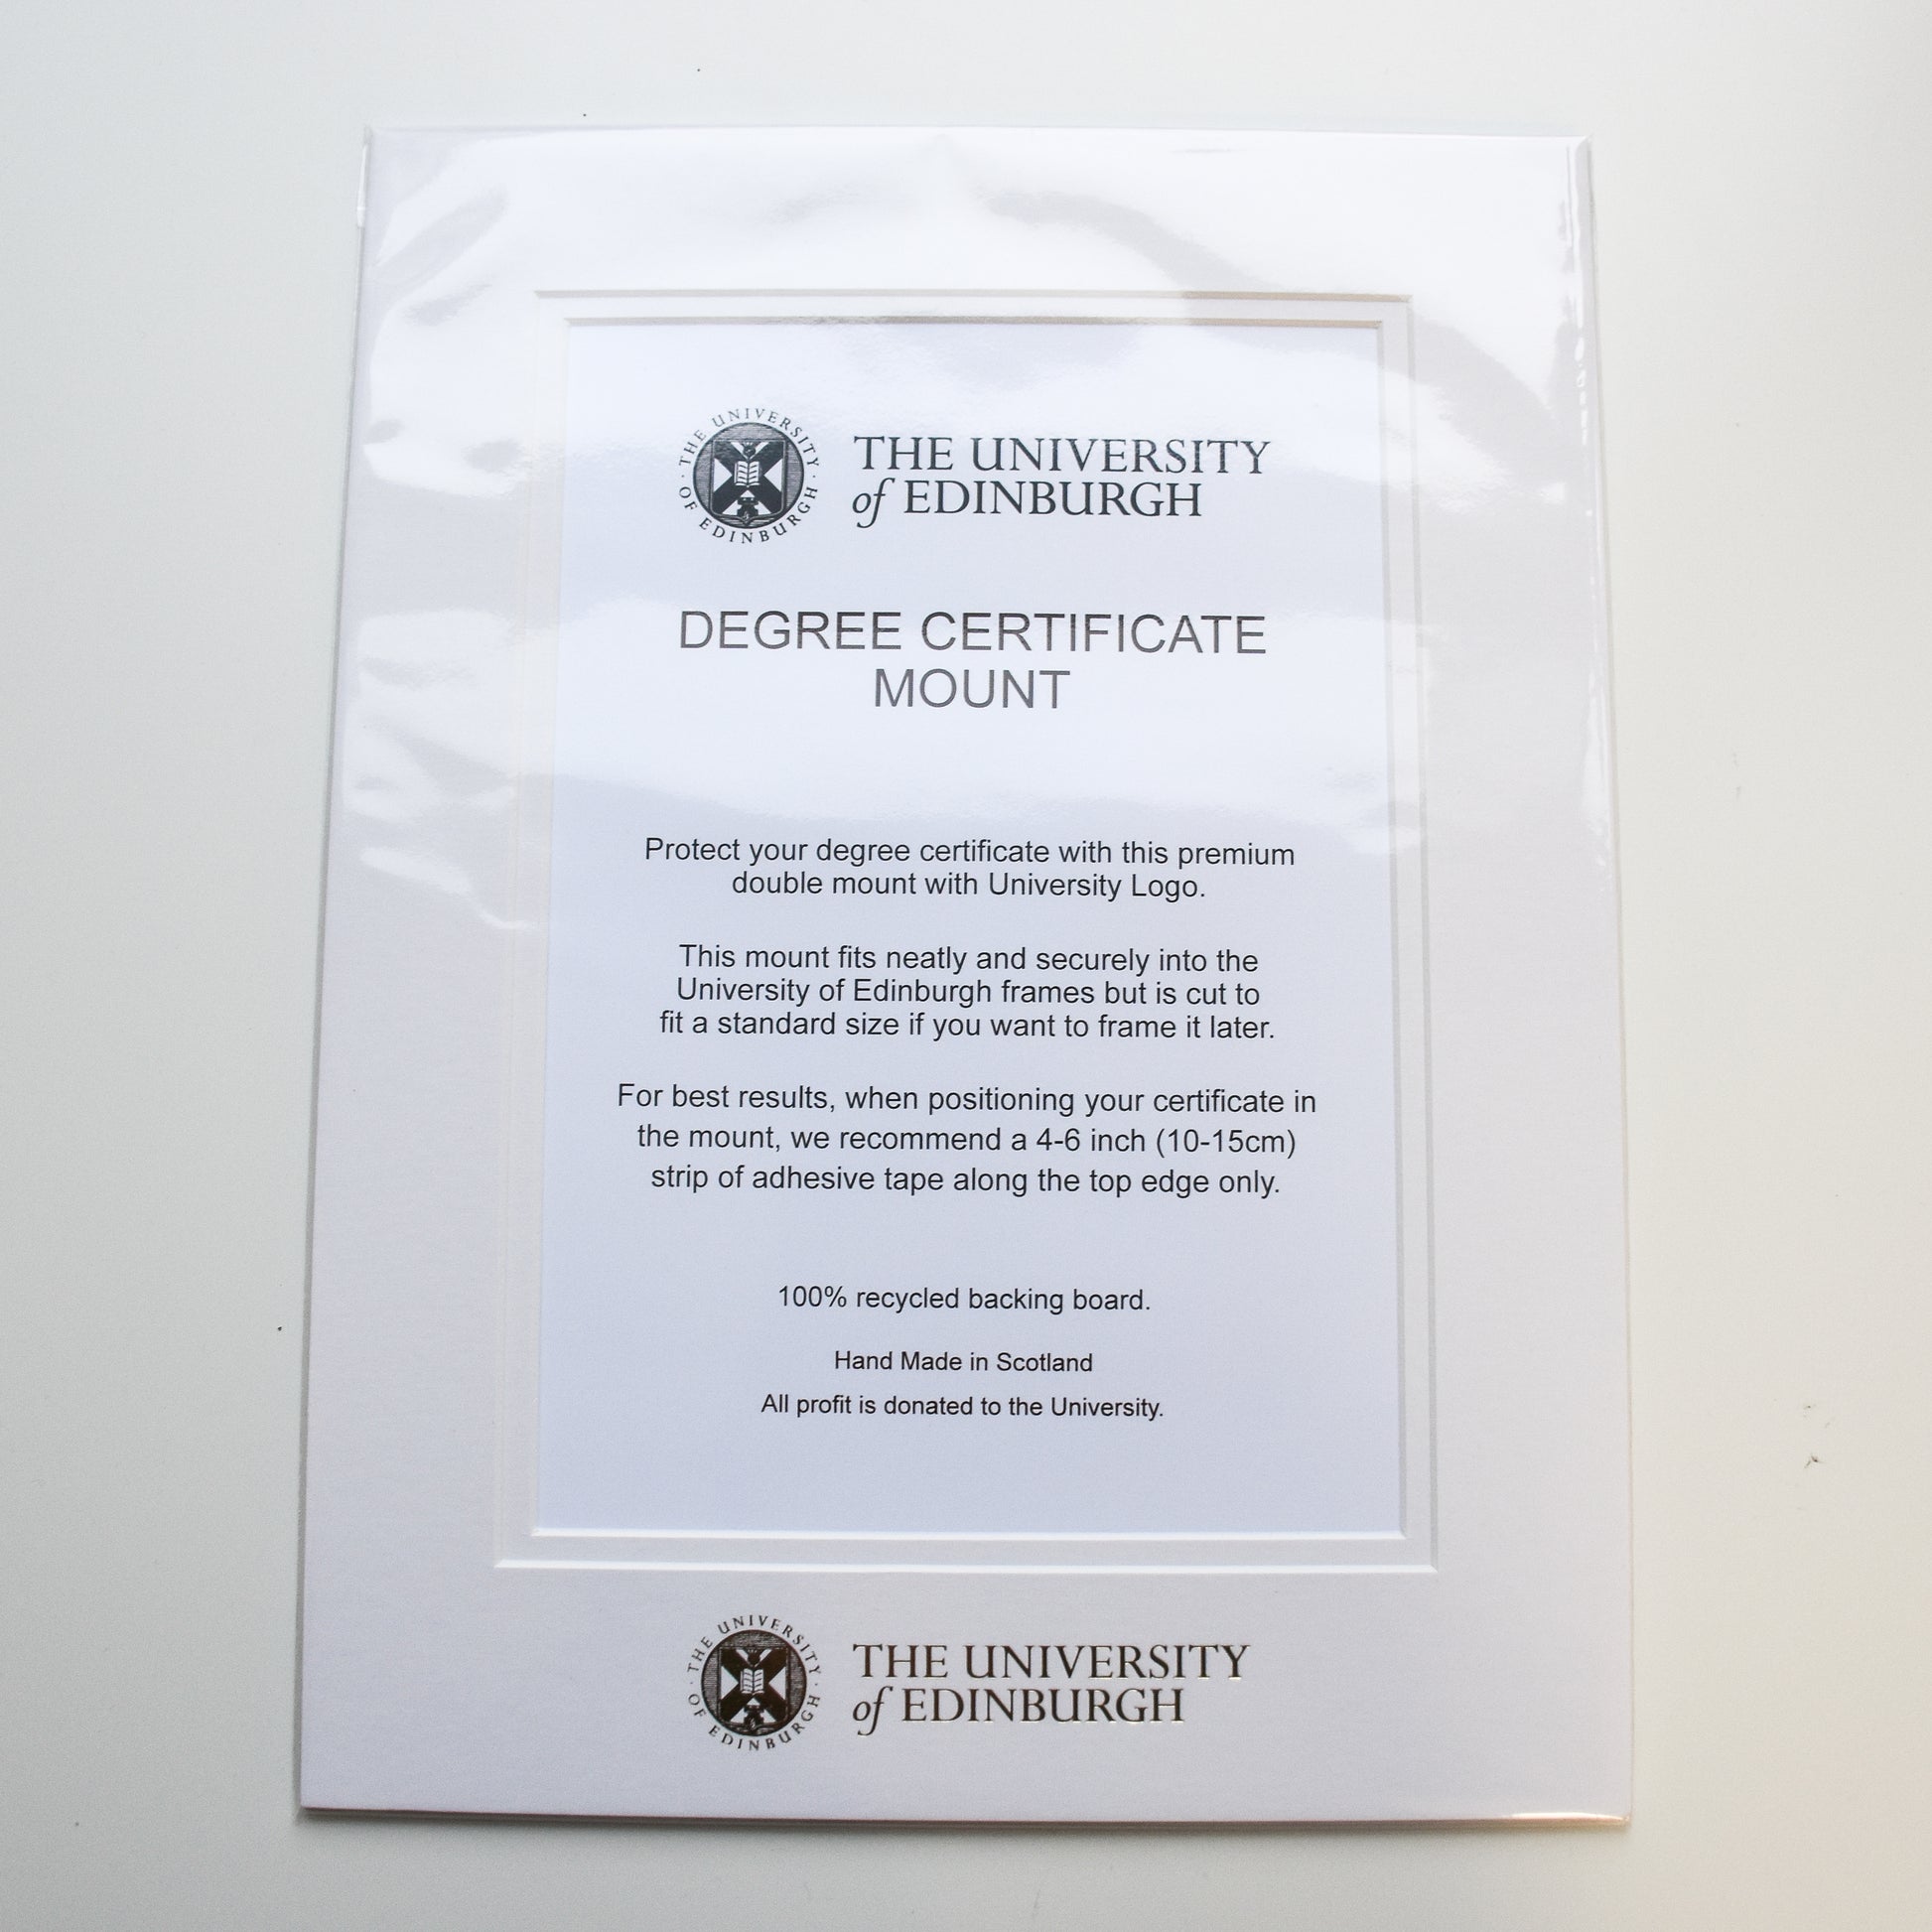 Degree certificate mount with gold foil logo detailing 